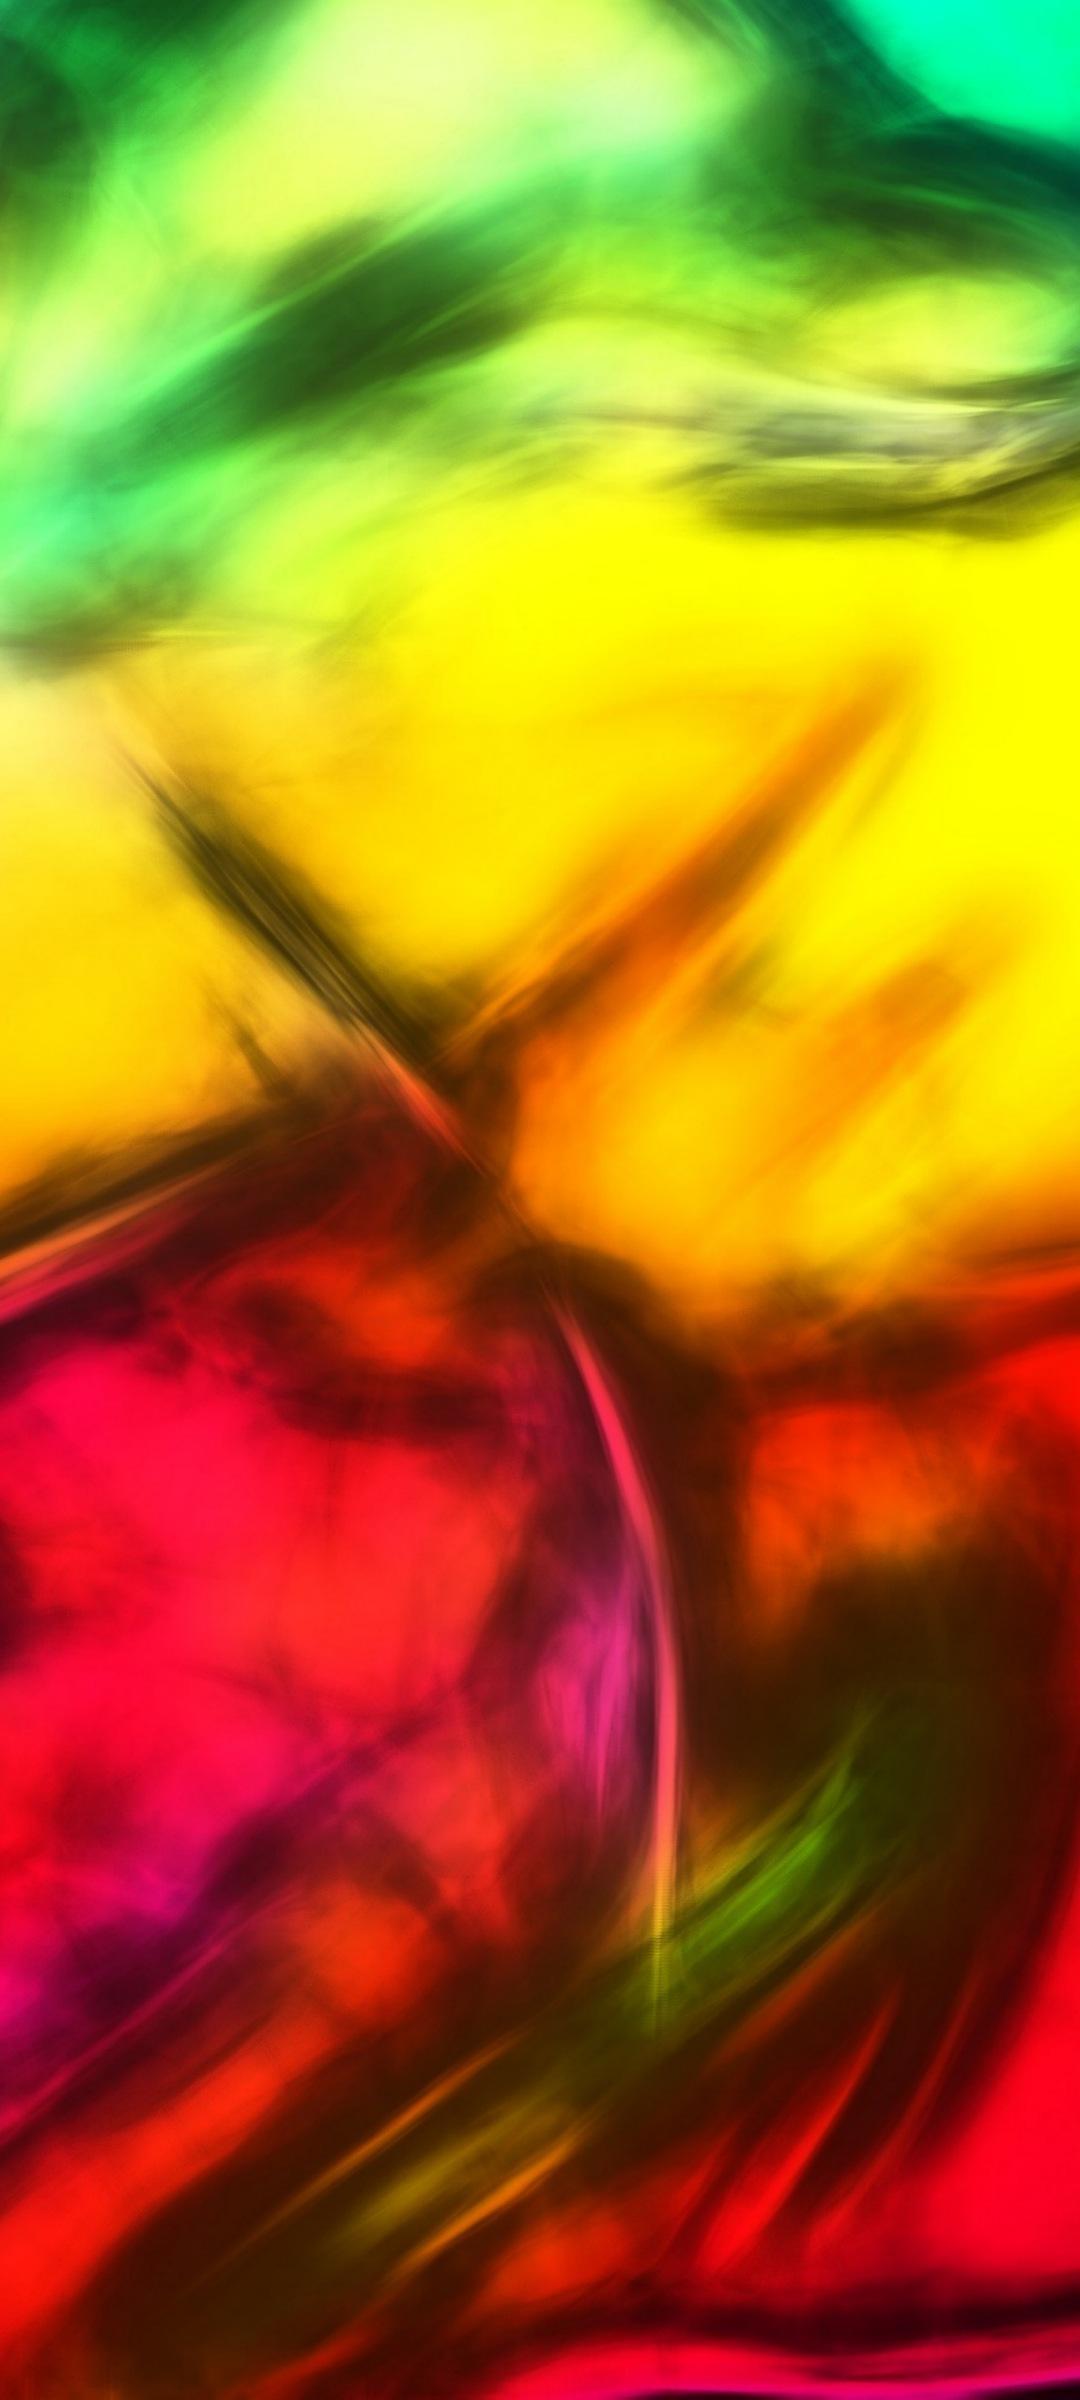 Wallpaper abstract. 1080x2400 wallpaper for mobile